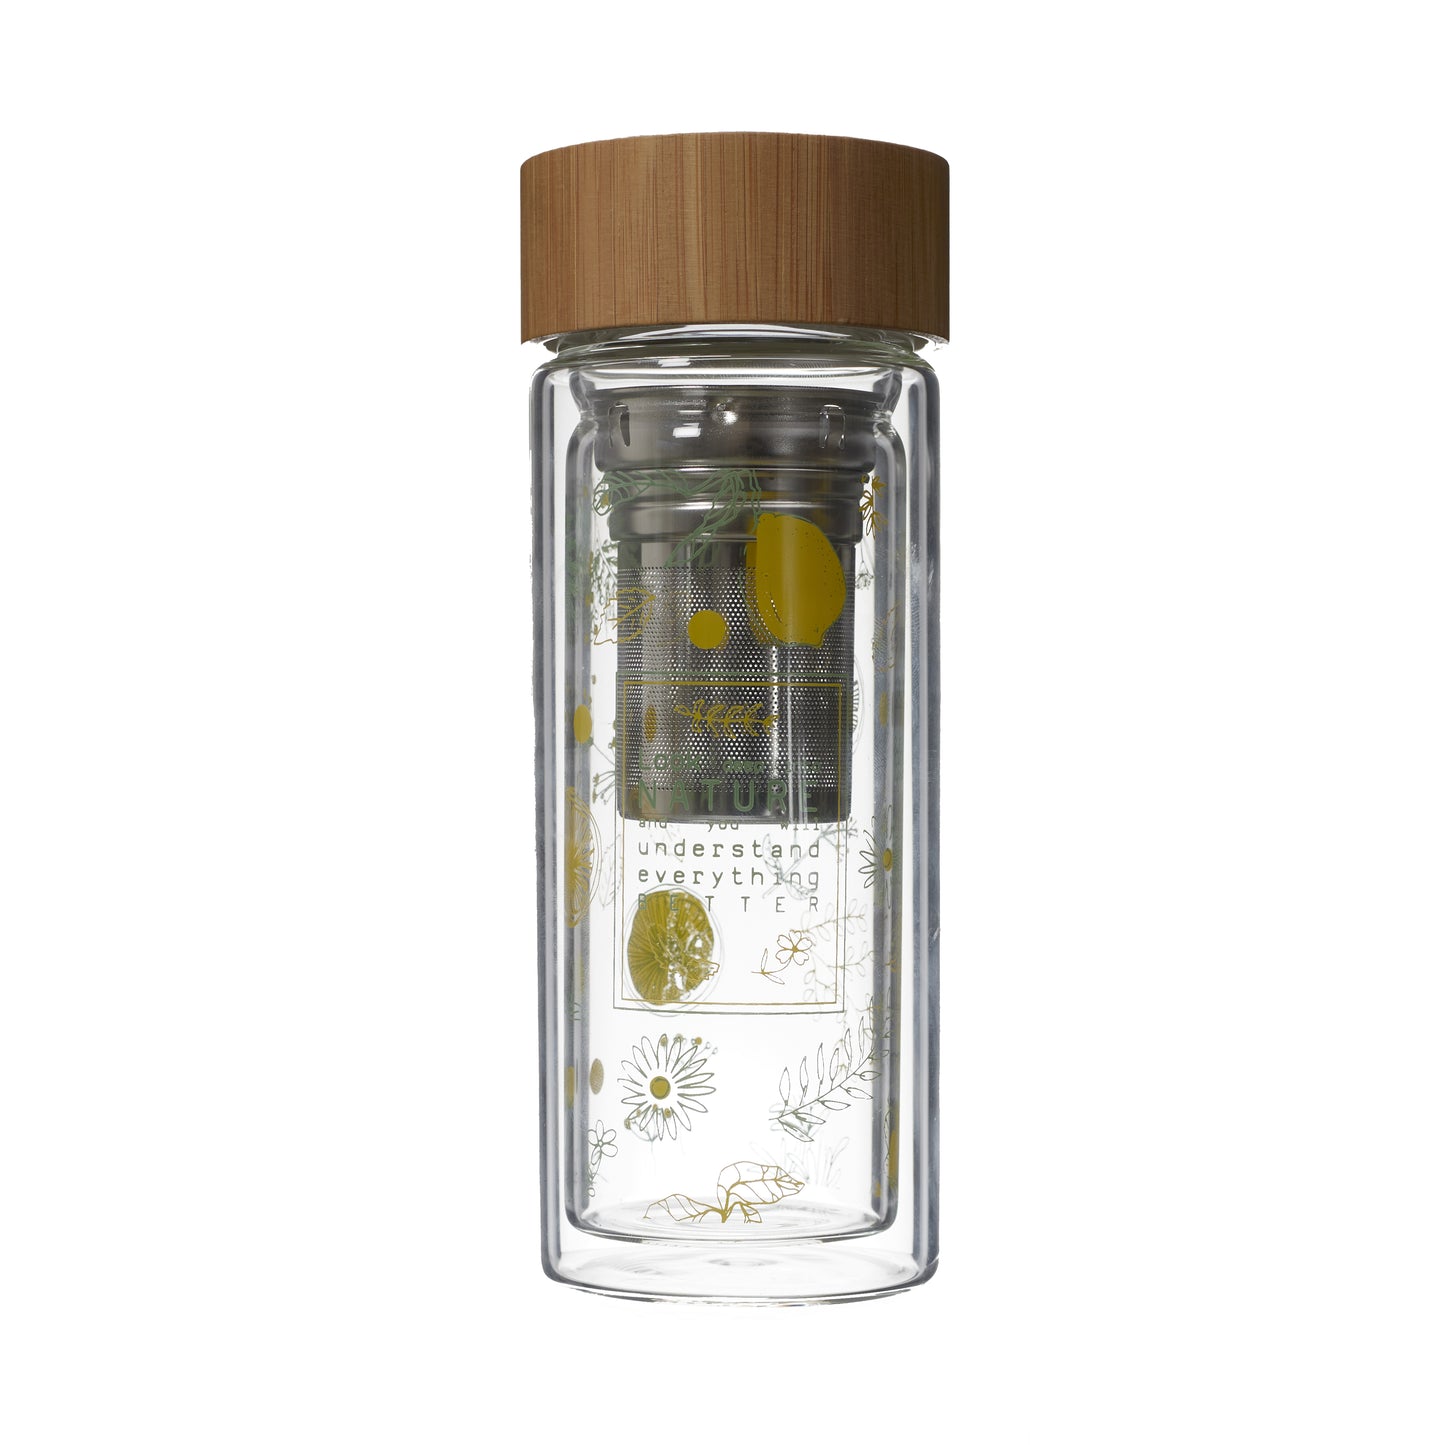 BOUTEILLE INFUSION HERBAL SLOW LIFE